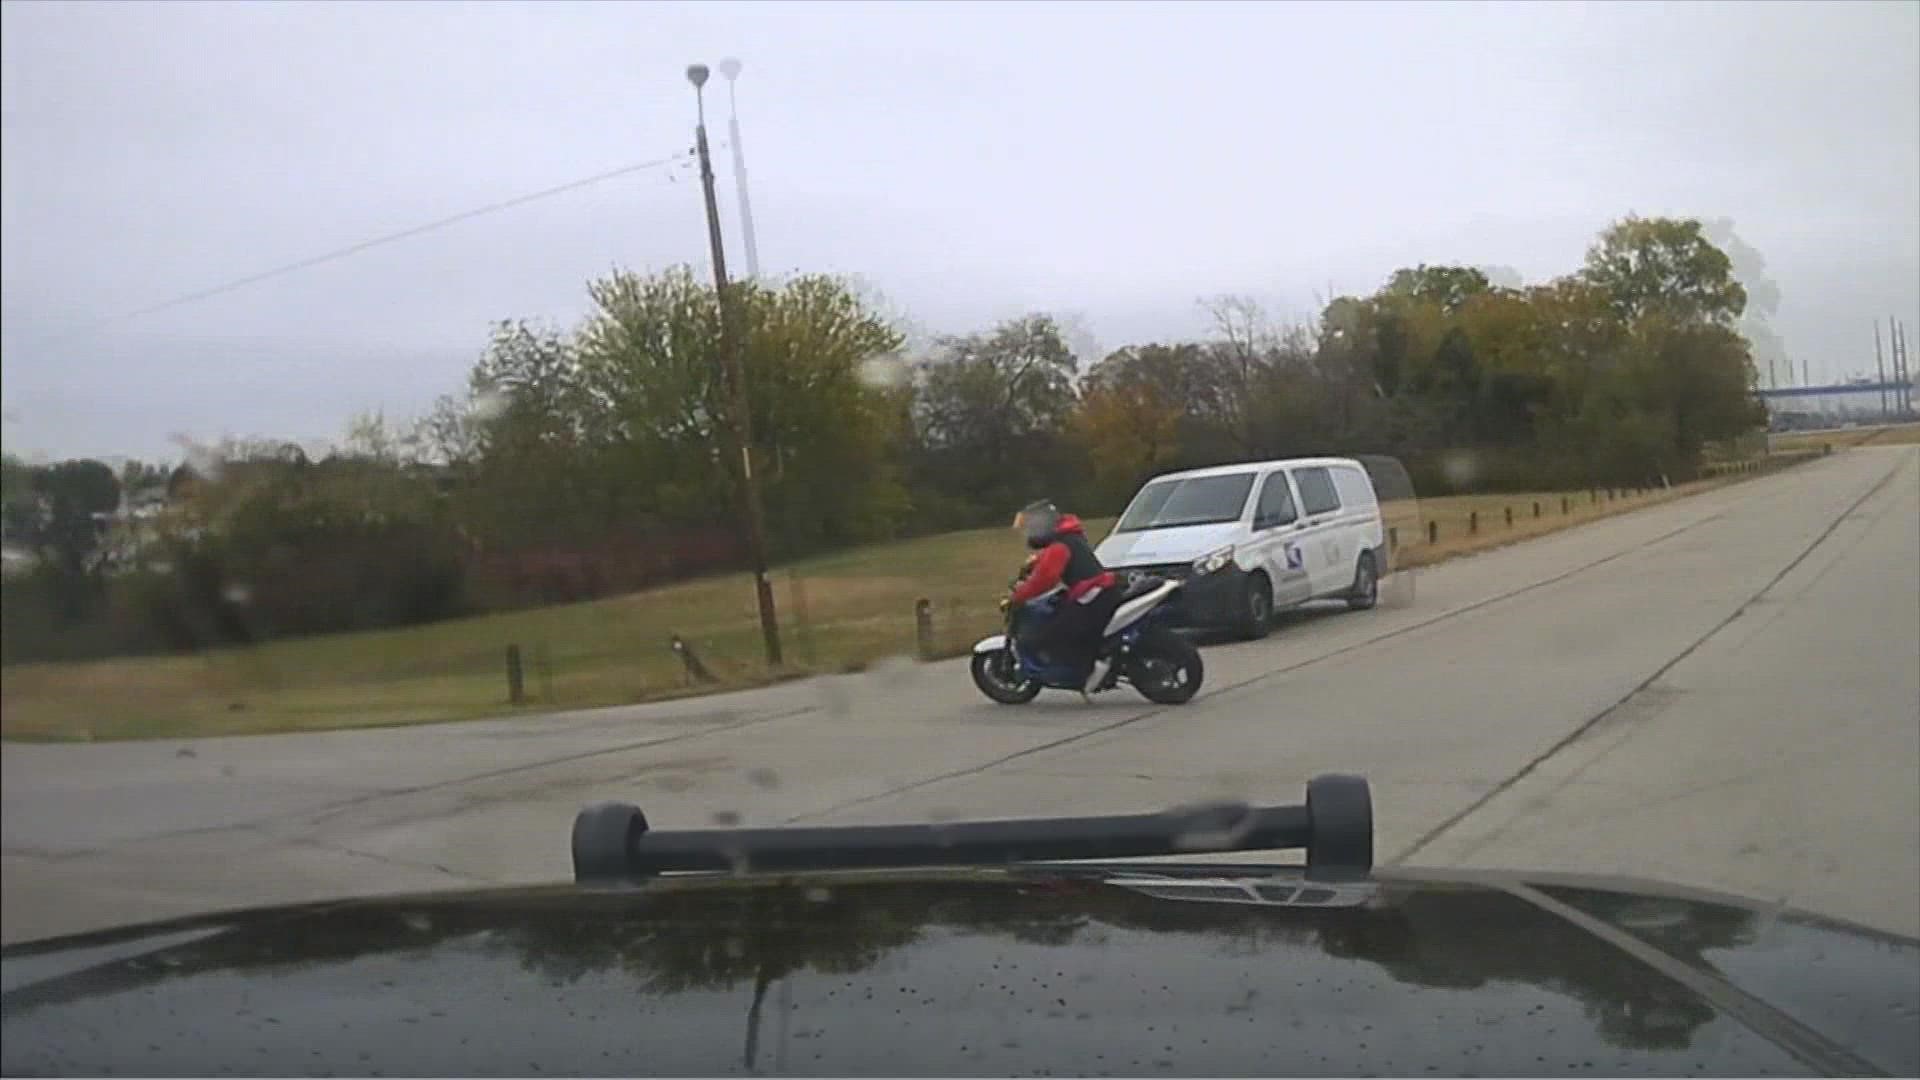 Police said officers tried to pull the motorcyclist over since he didn't have plates on his bike.